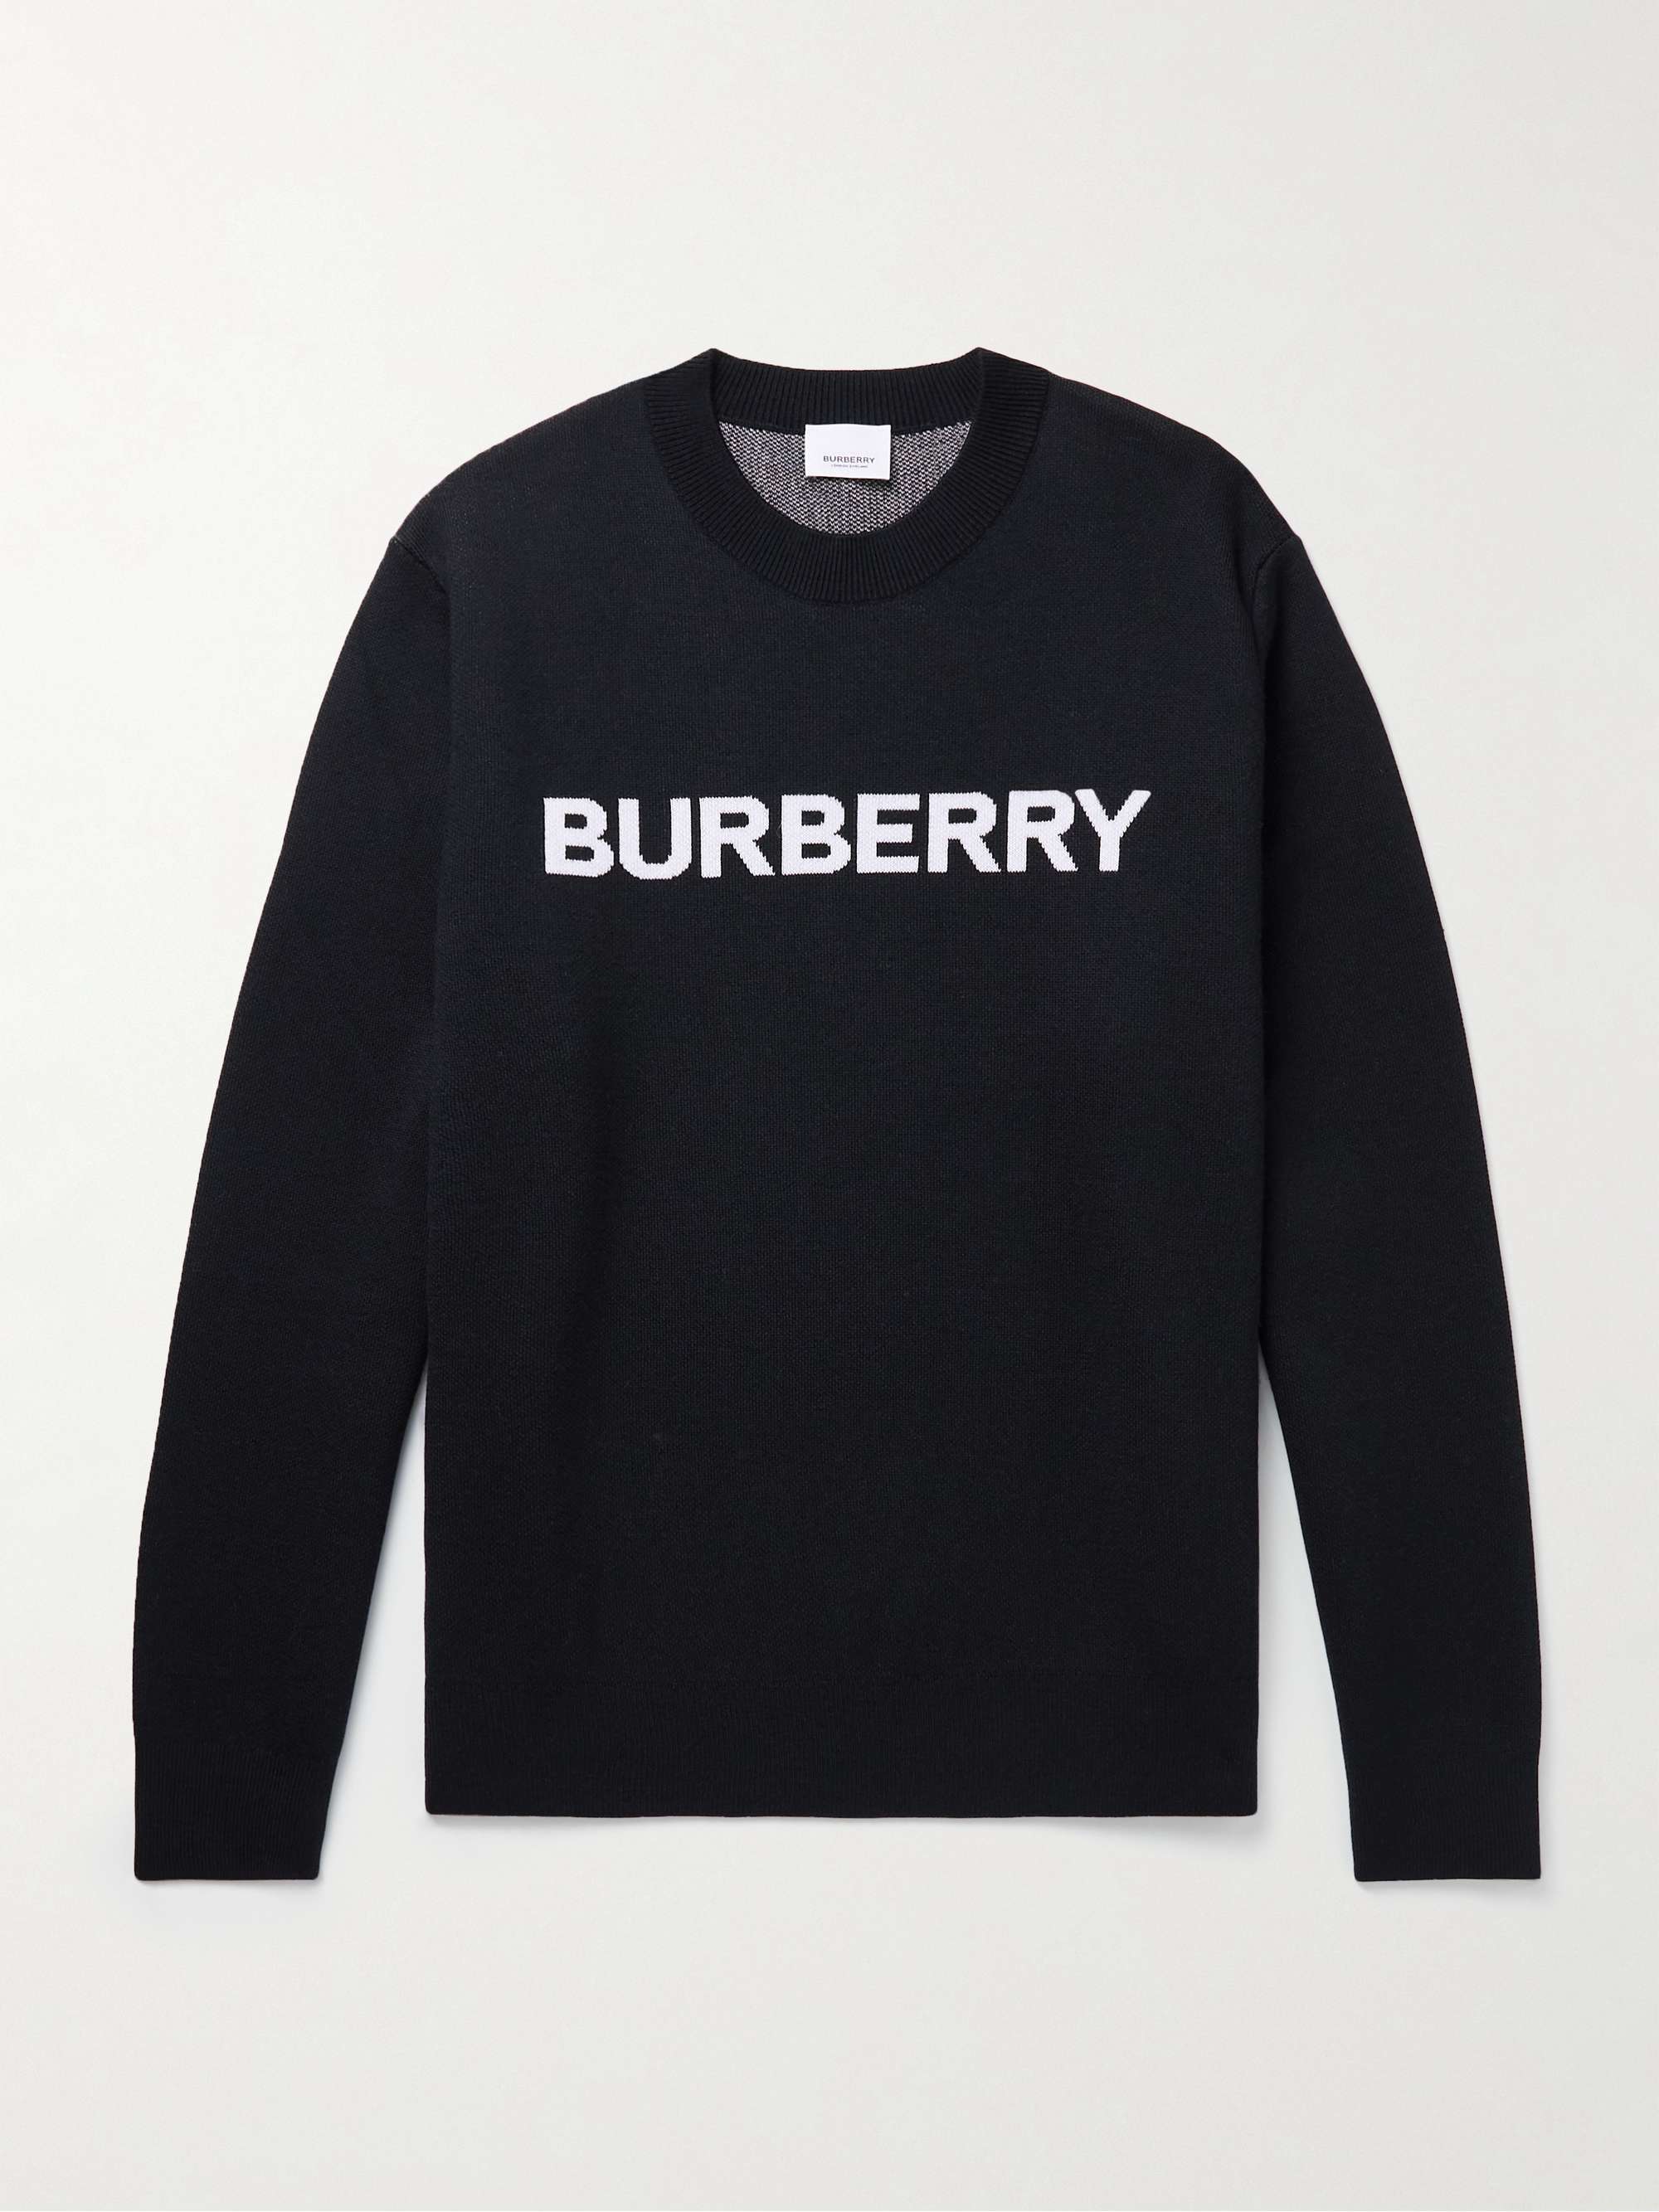 BURBERRY Logo-Intarsia Wool and Cotton-Blend Sweater | MR PORTER